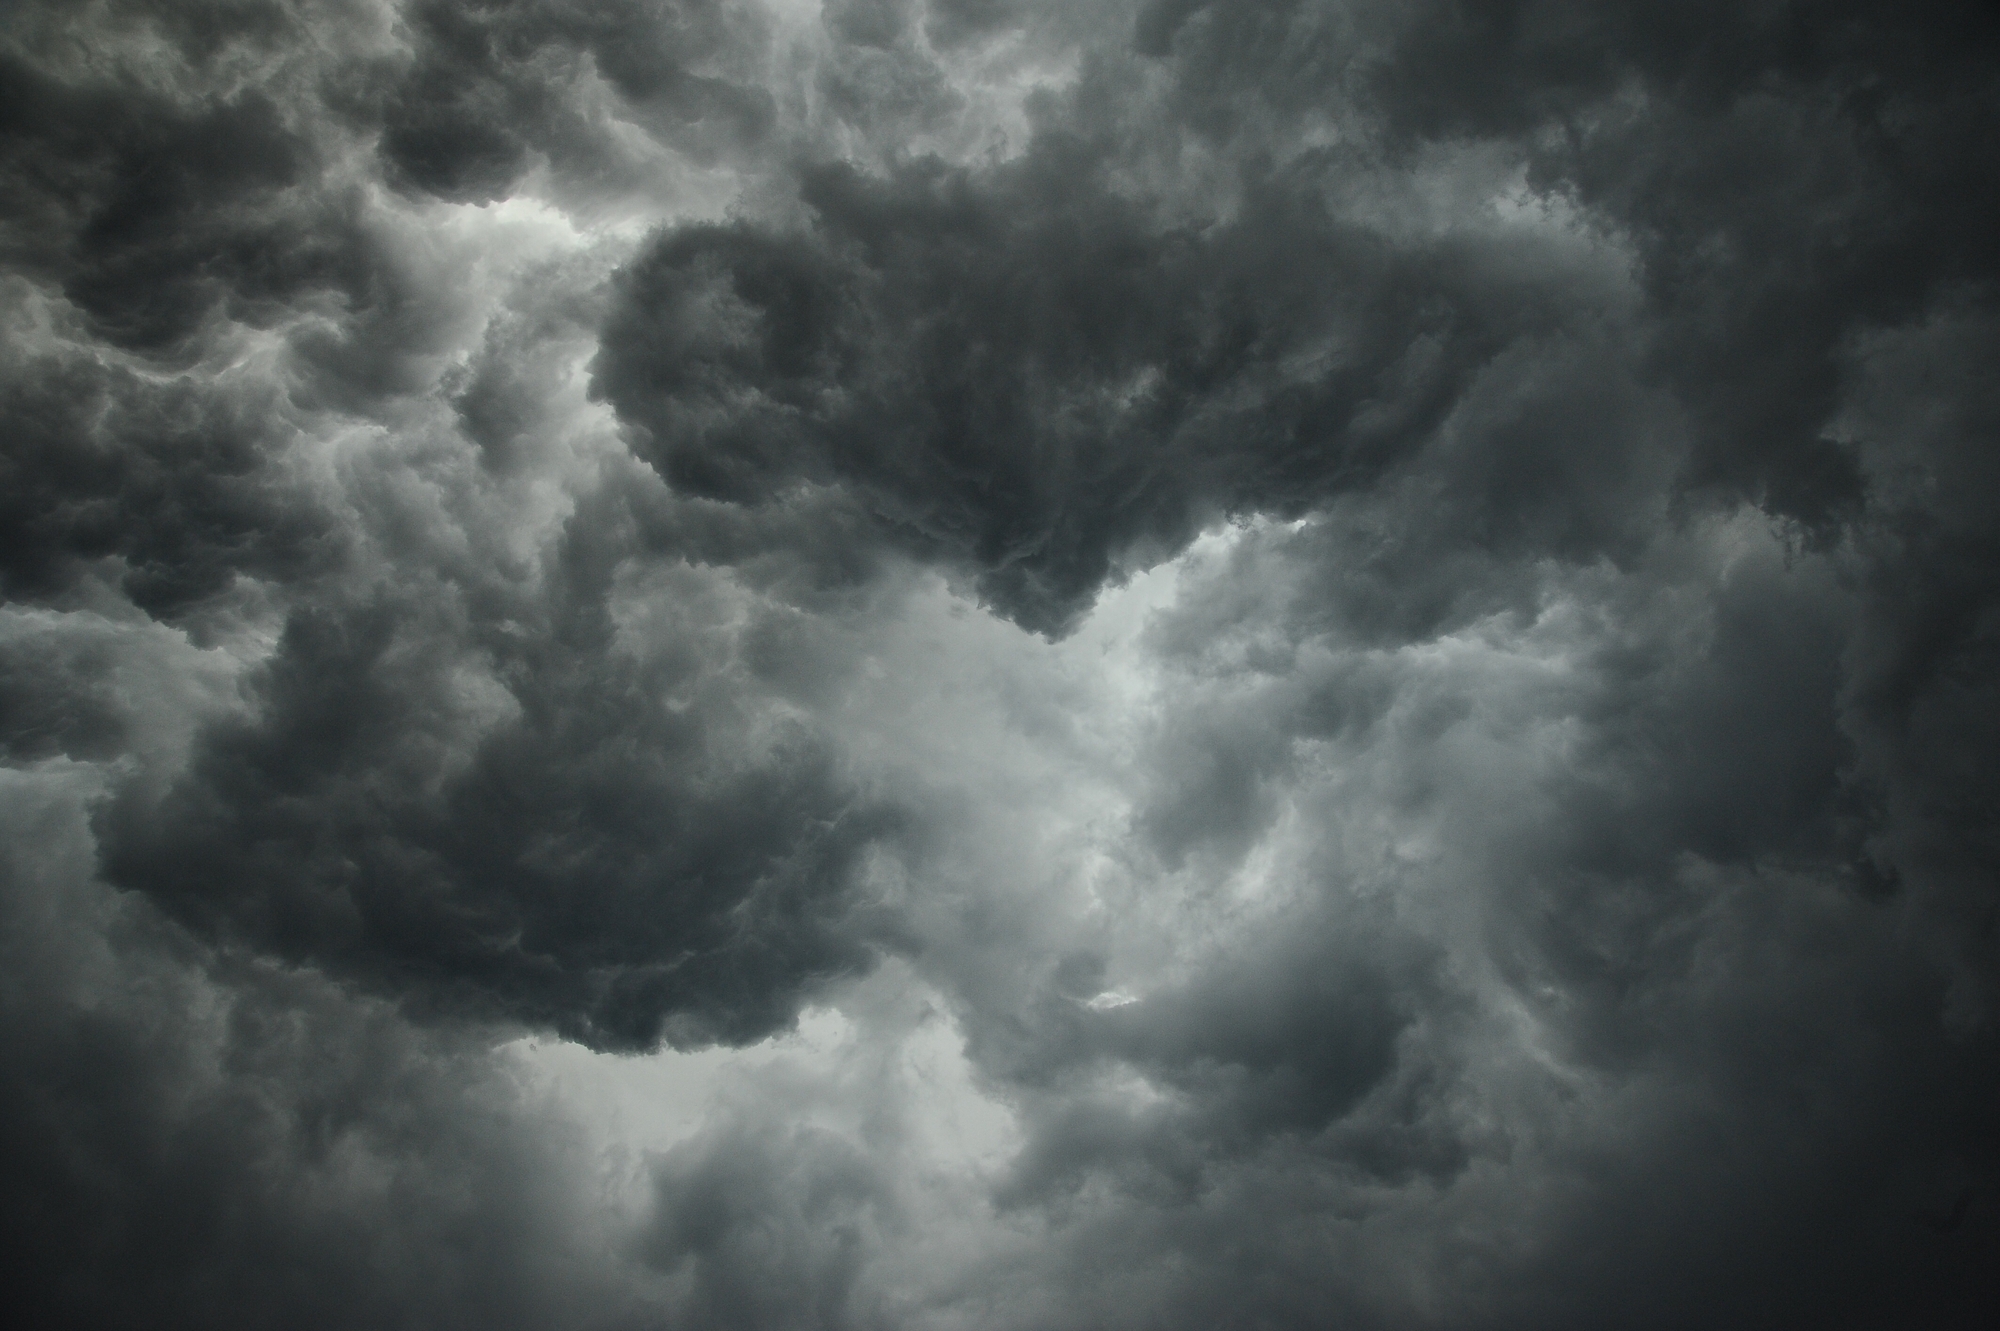 image of storm clouds gathering